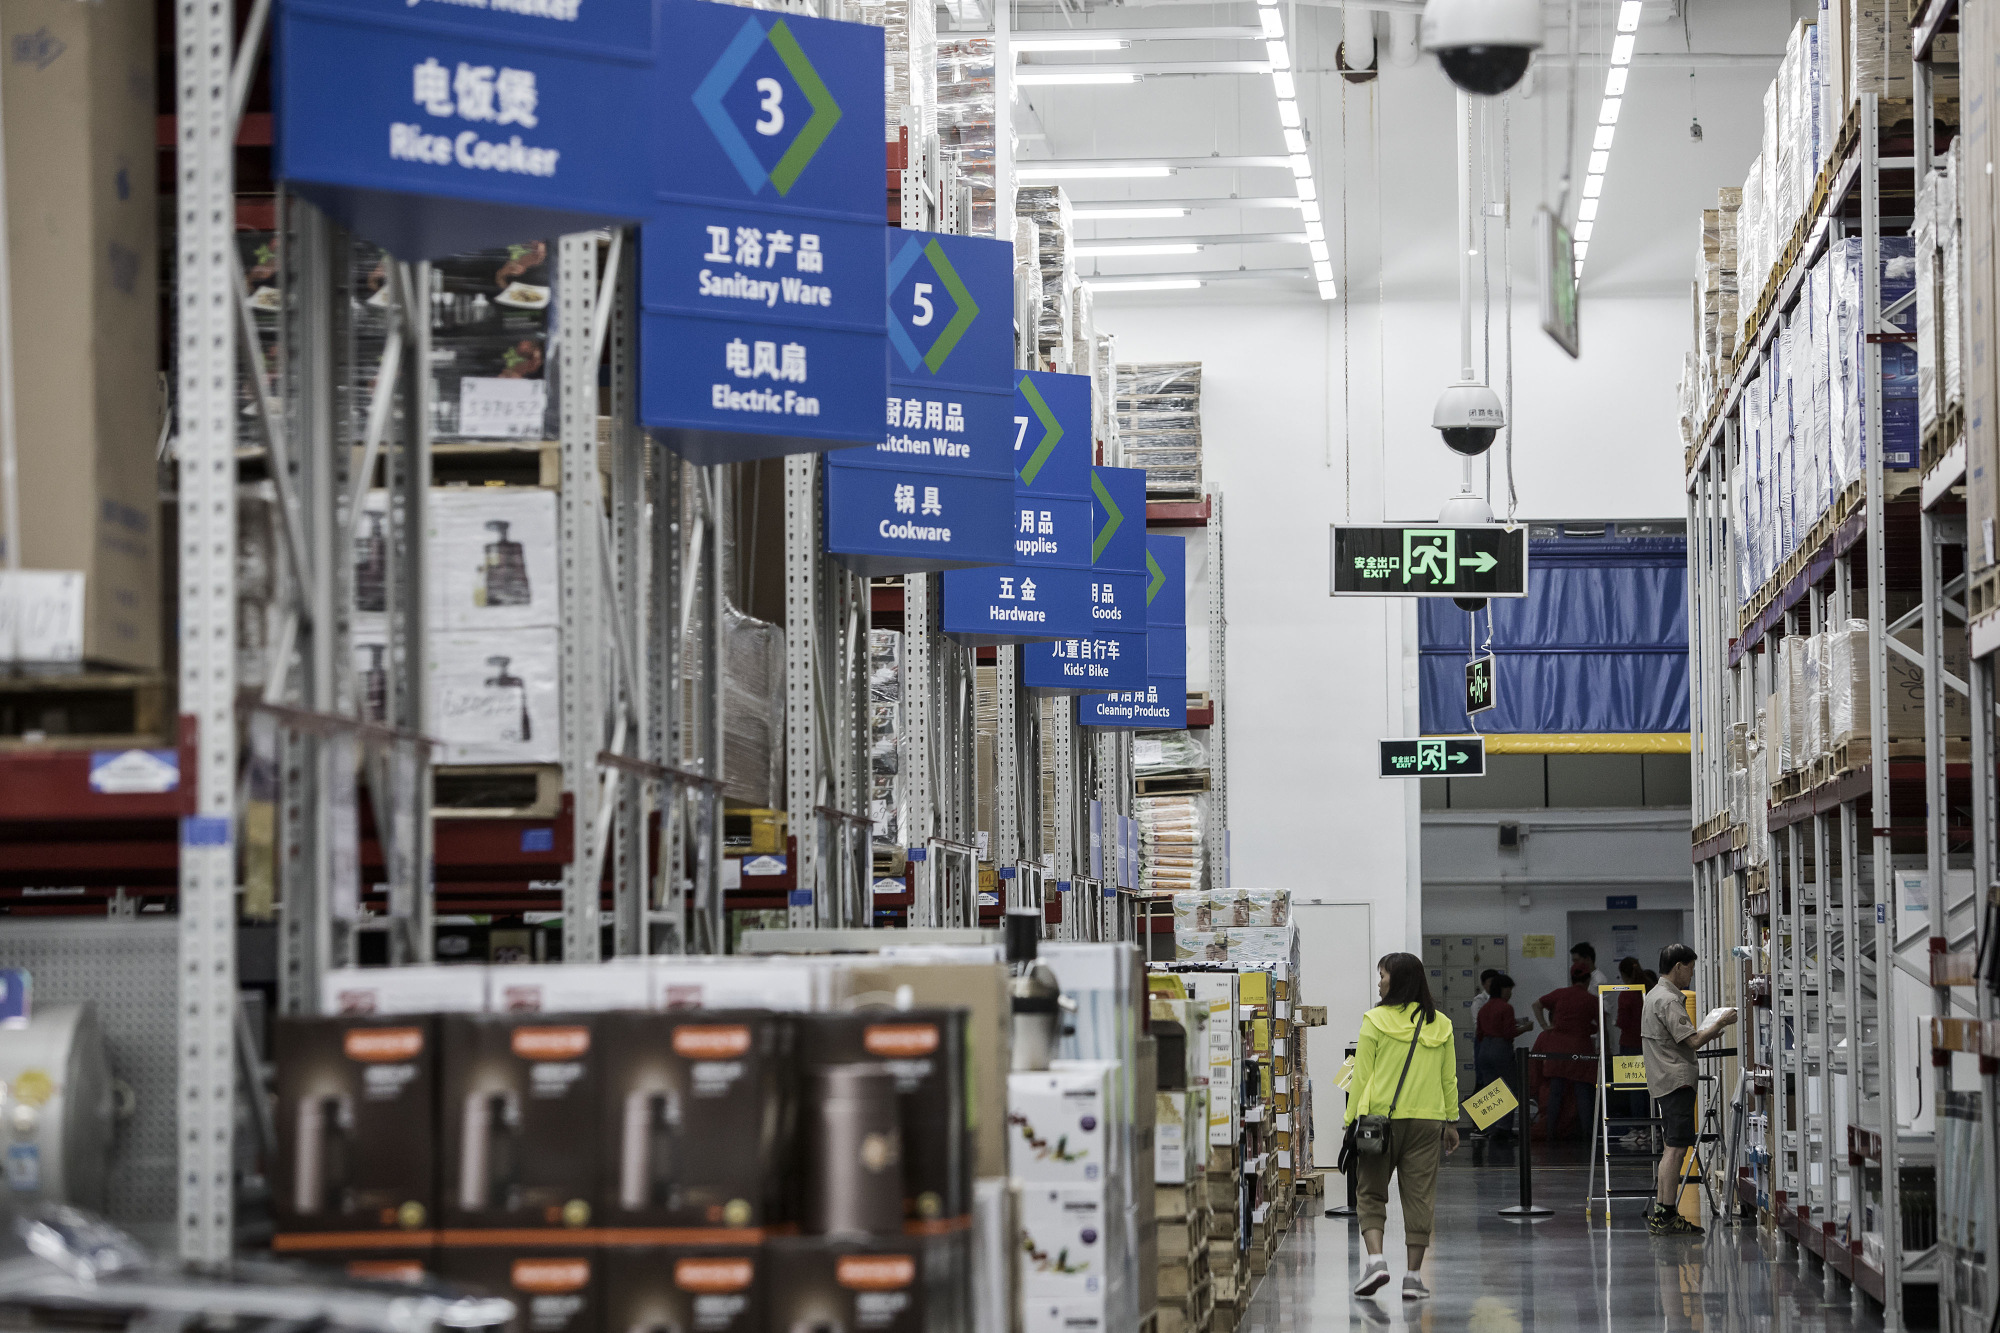 Customers browse a Sam's Club store in Zhuhai, China in 2016.